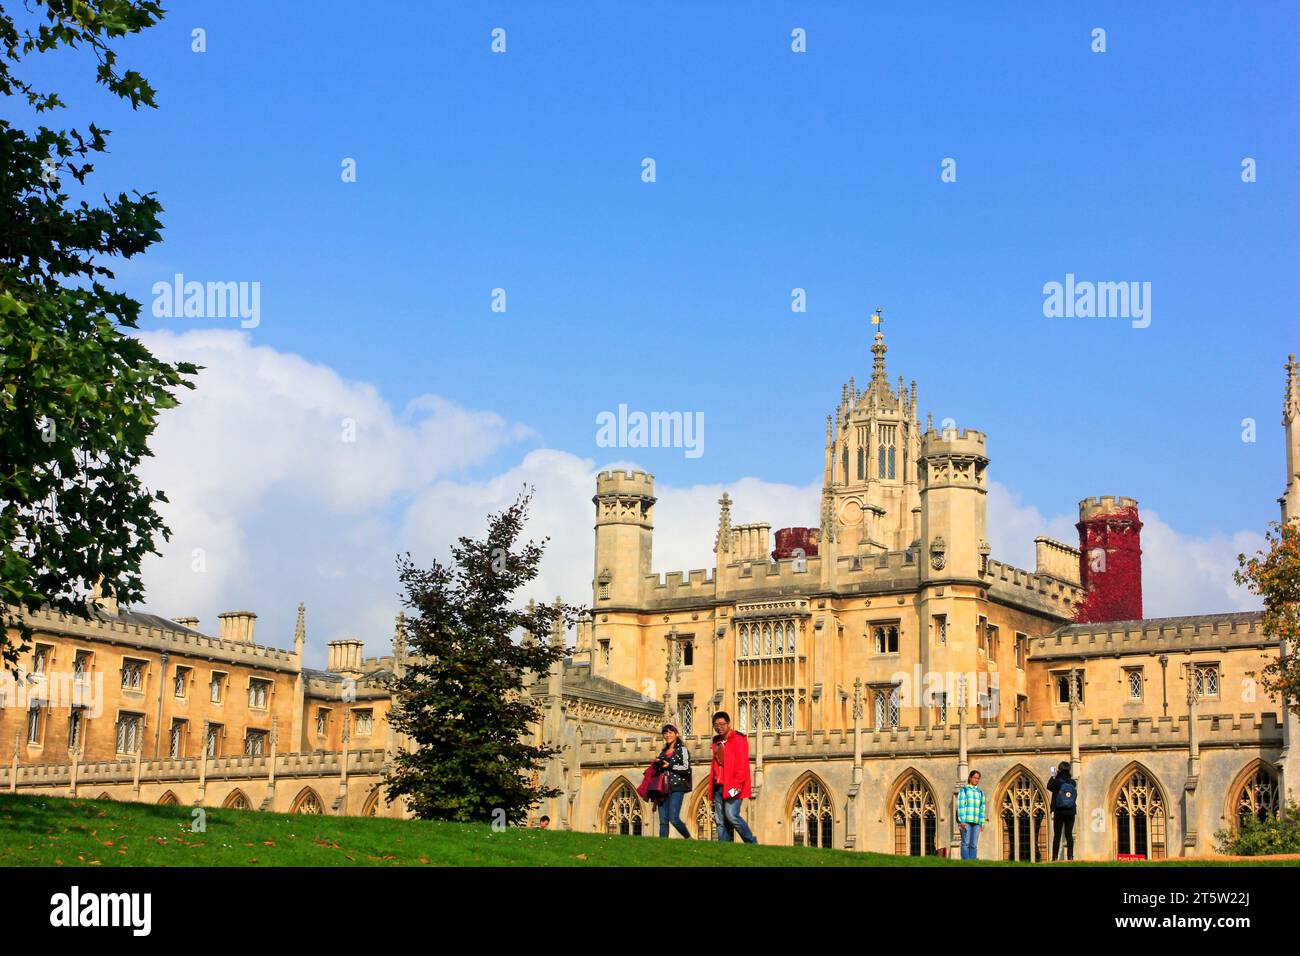 Cambridge - October 3: people play on the lawn in a park, on October 3, 2015, Cambridge, UK. Stock Photo